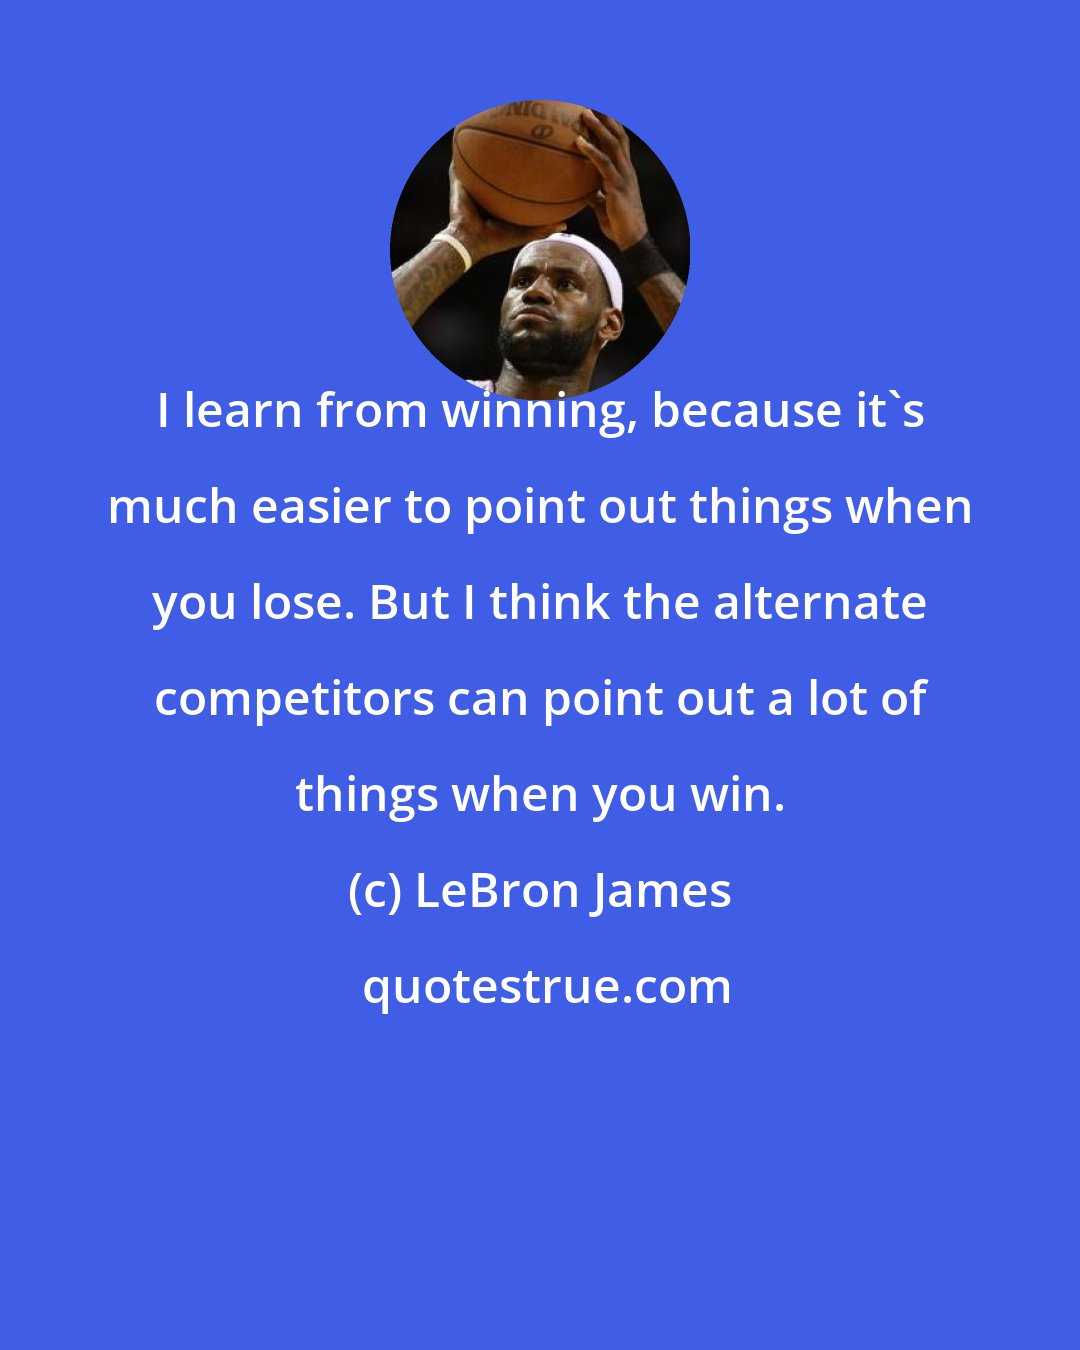 LeBron James: I learn from winning, because it's much easier to point out things when you lose. But I think the alternate competitors can point out a lot of things when you win.